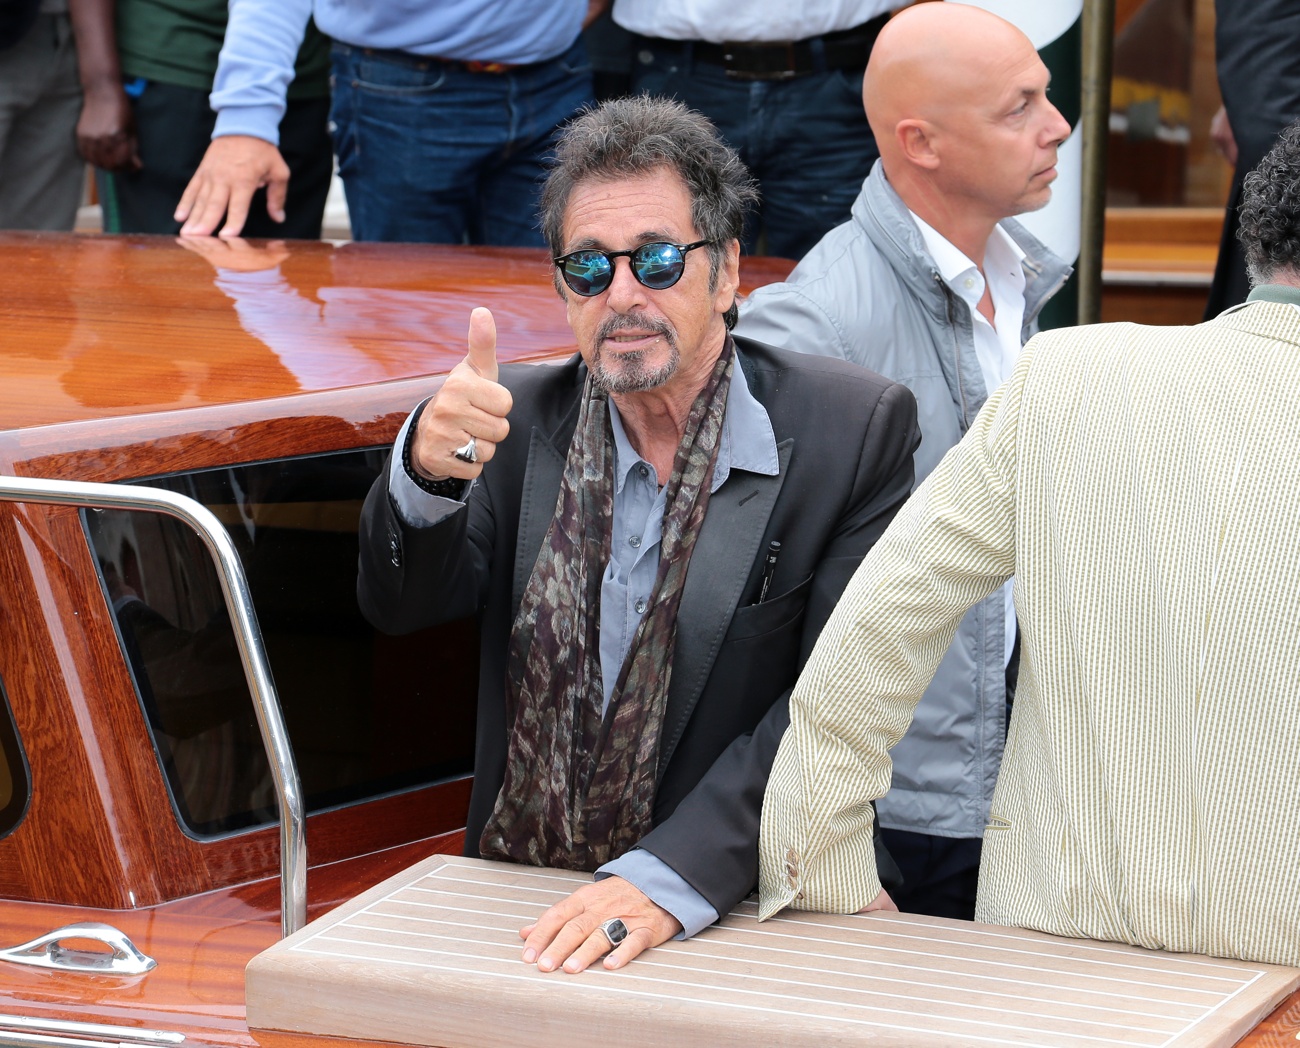 Al Pacino prepares for fatherhood again with fourth child on the way after 22 years